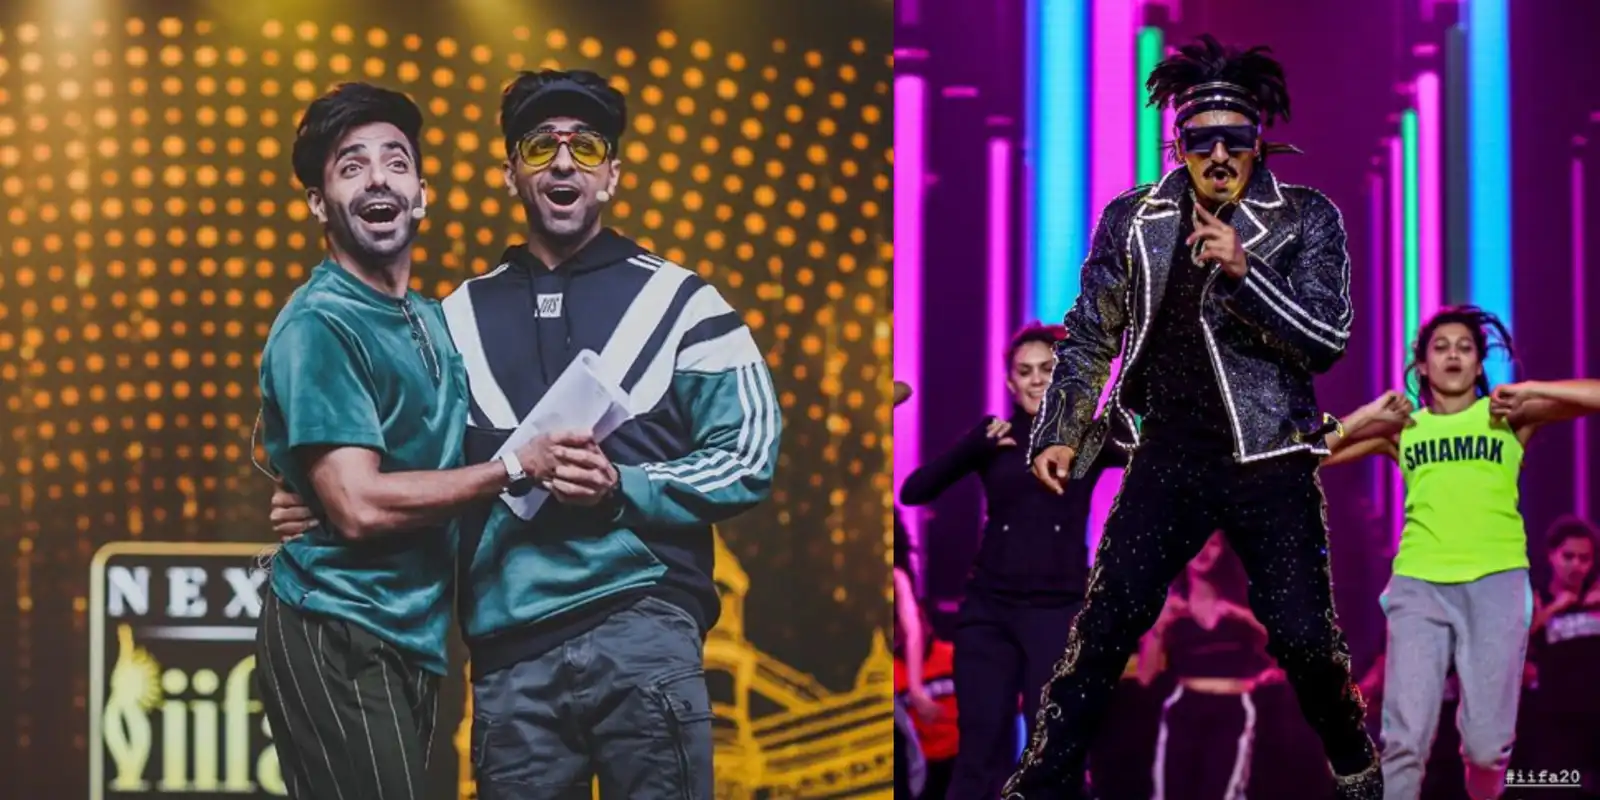 IIFA Awards 2019: Here’s What To Expect From Tonight’s Award Show!